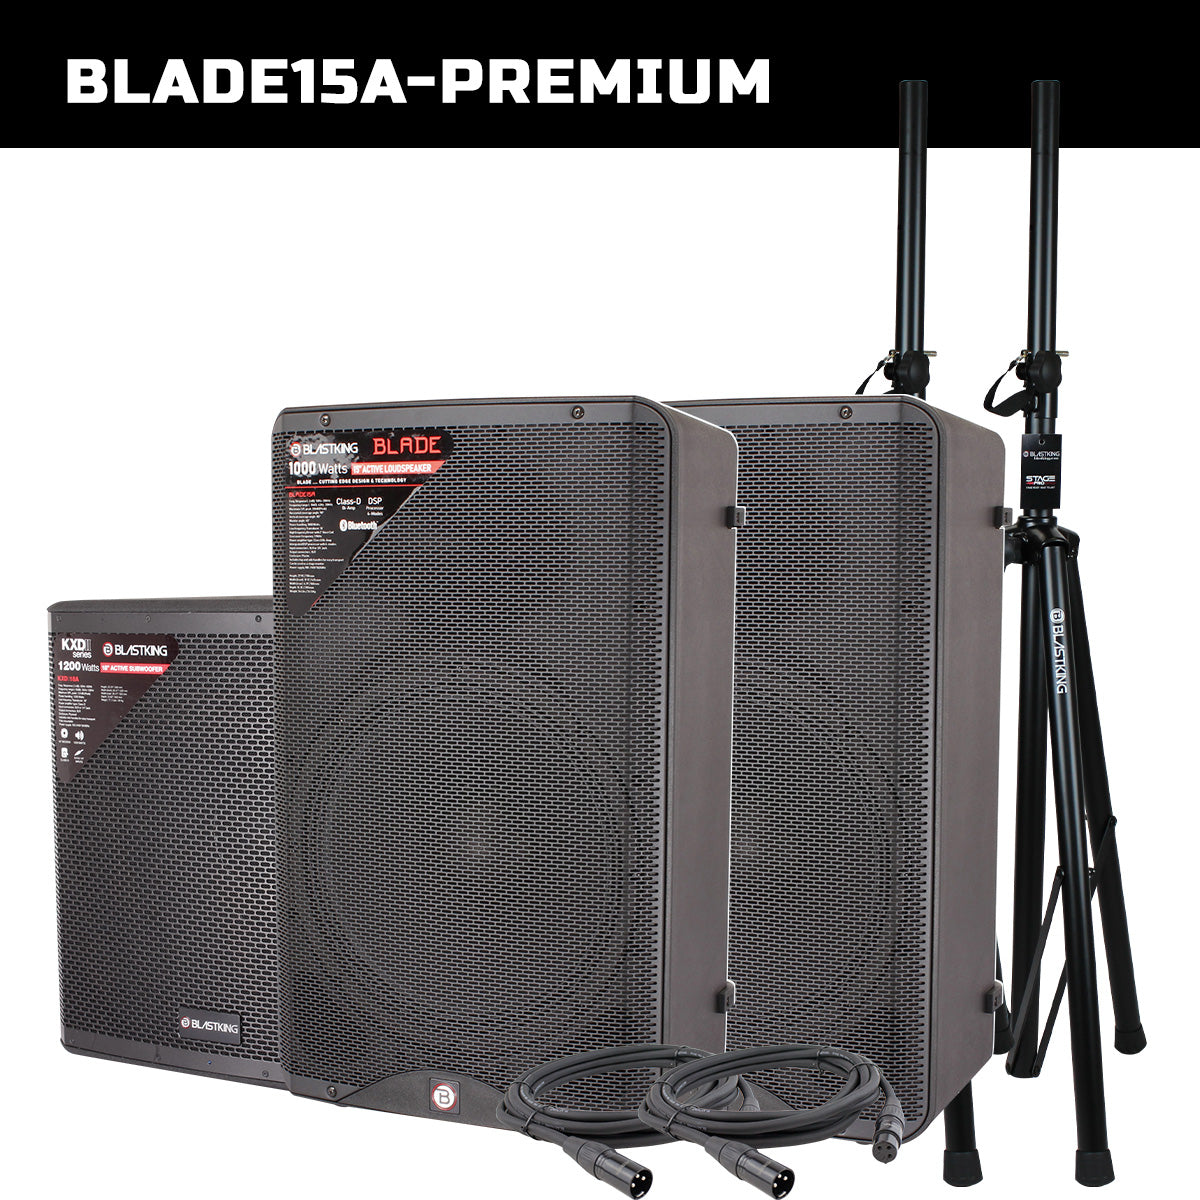 Blastking BLADE15A-PREMIUM (2) 15” Active Loudspeakers 1000 Watts Class-D (1) 18 inch Active Subwoofer with Stands and Cables